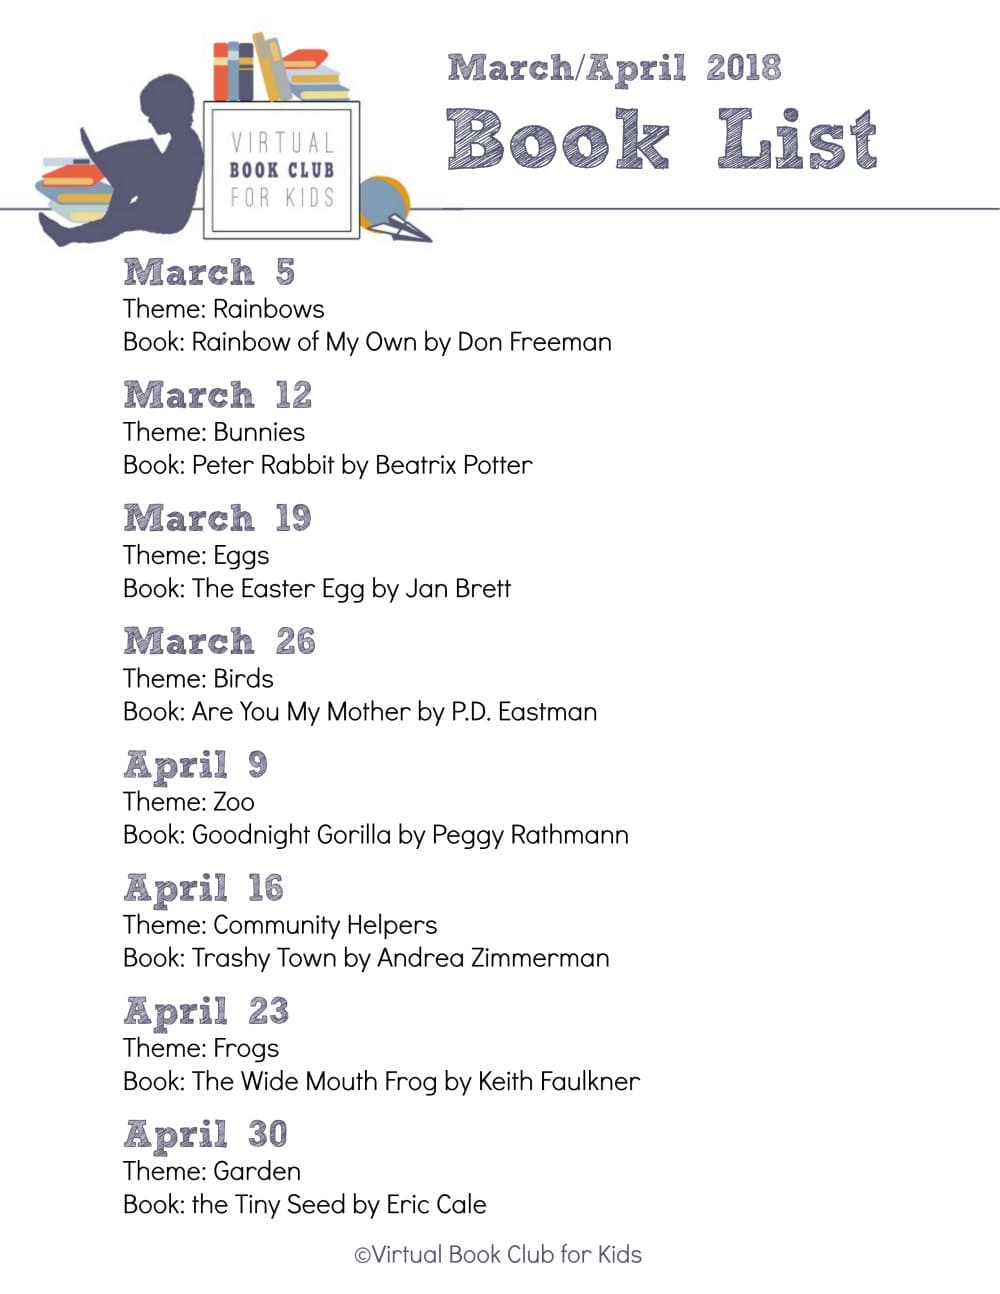 Spring Book List for the Virtual Book Club for Kids